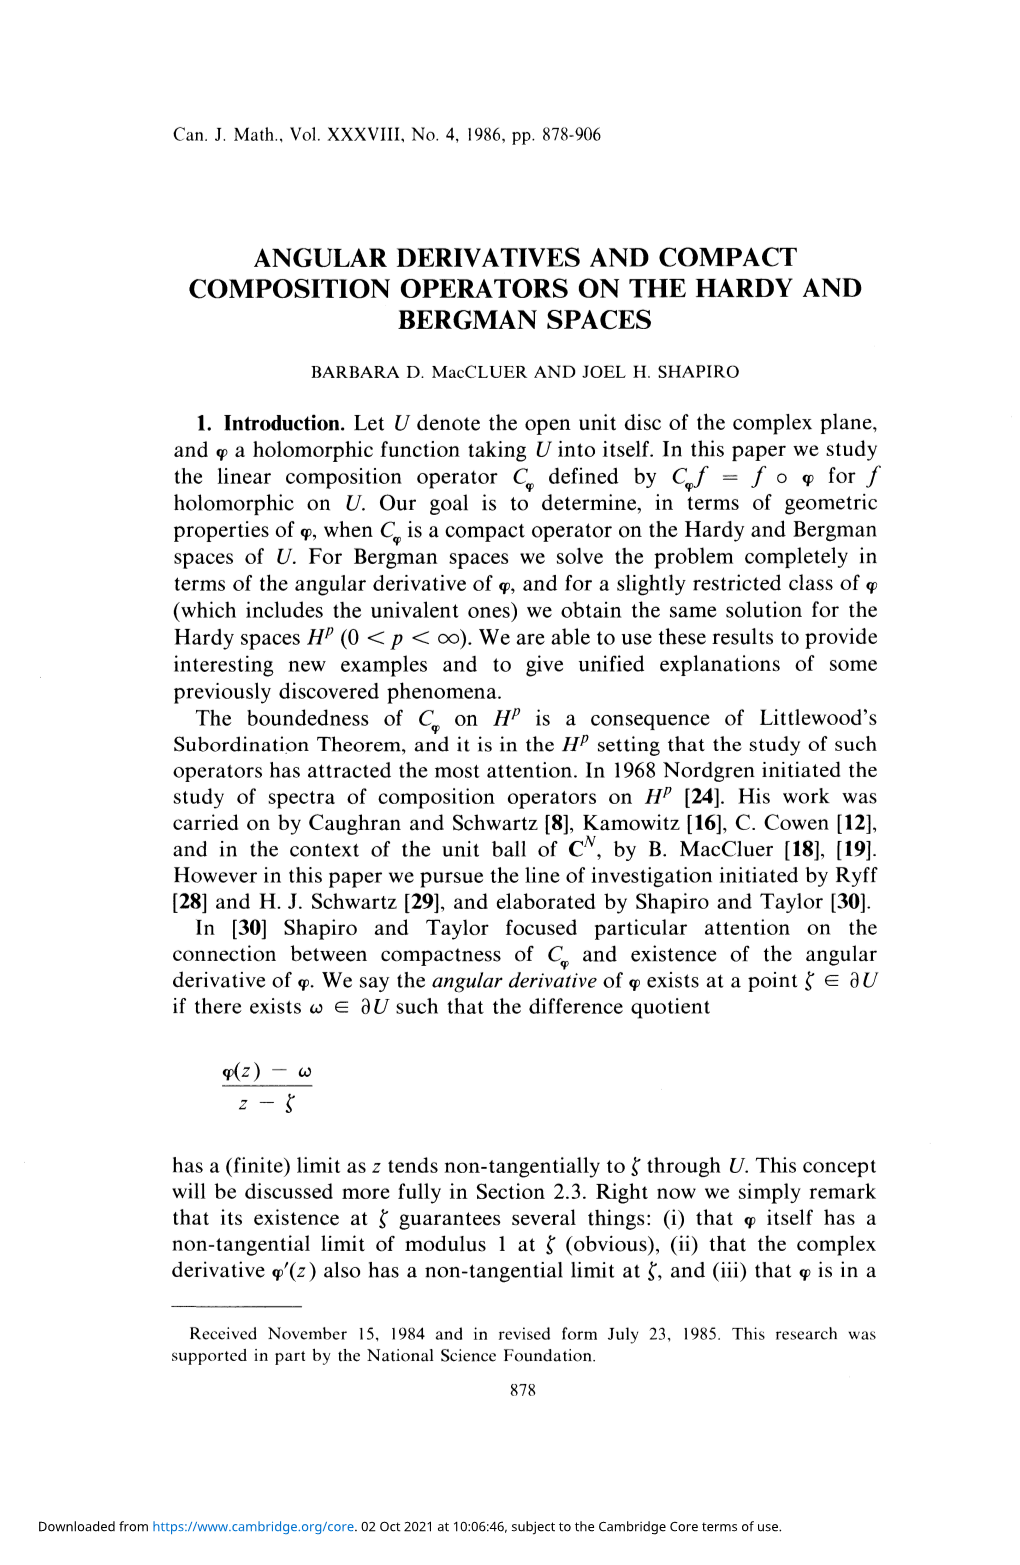 Angular Derivatives and Compact Composition Operators on the Hardy and Bergman Spaces